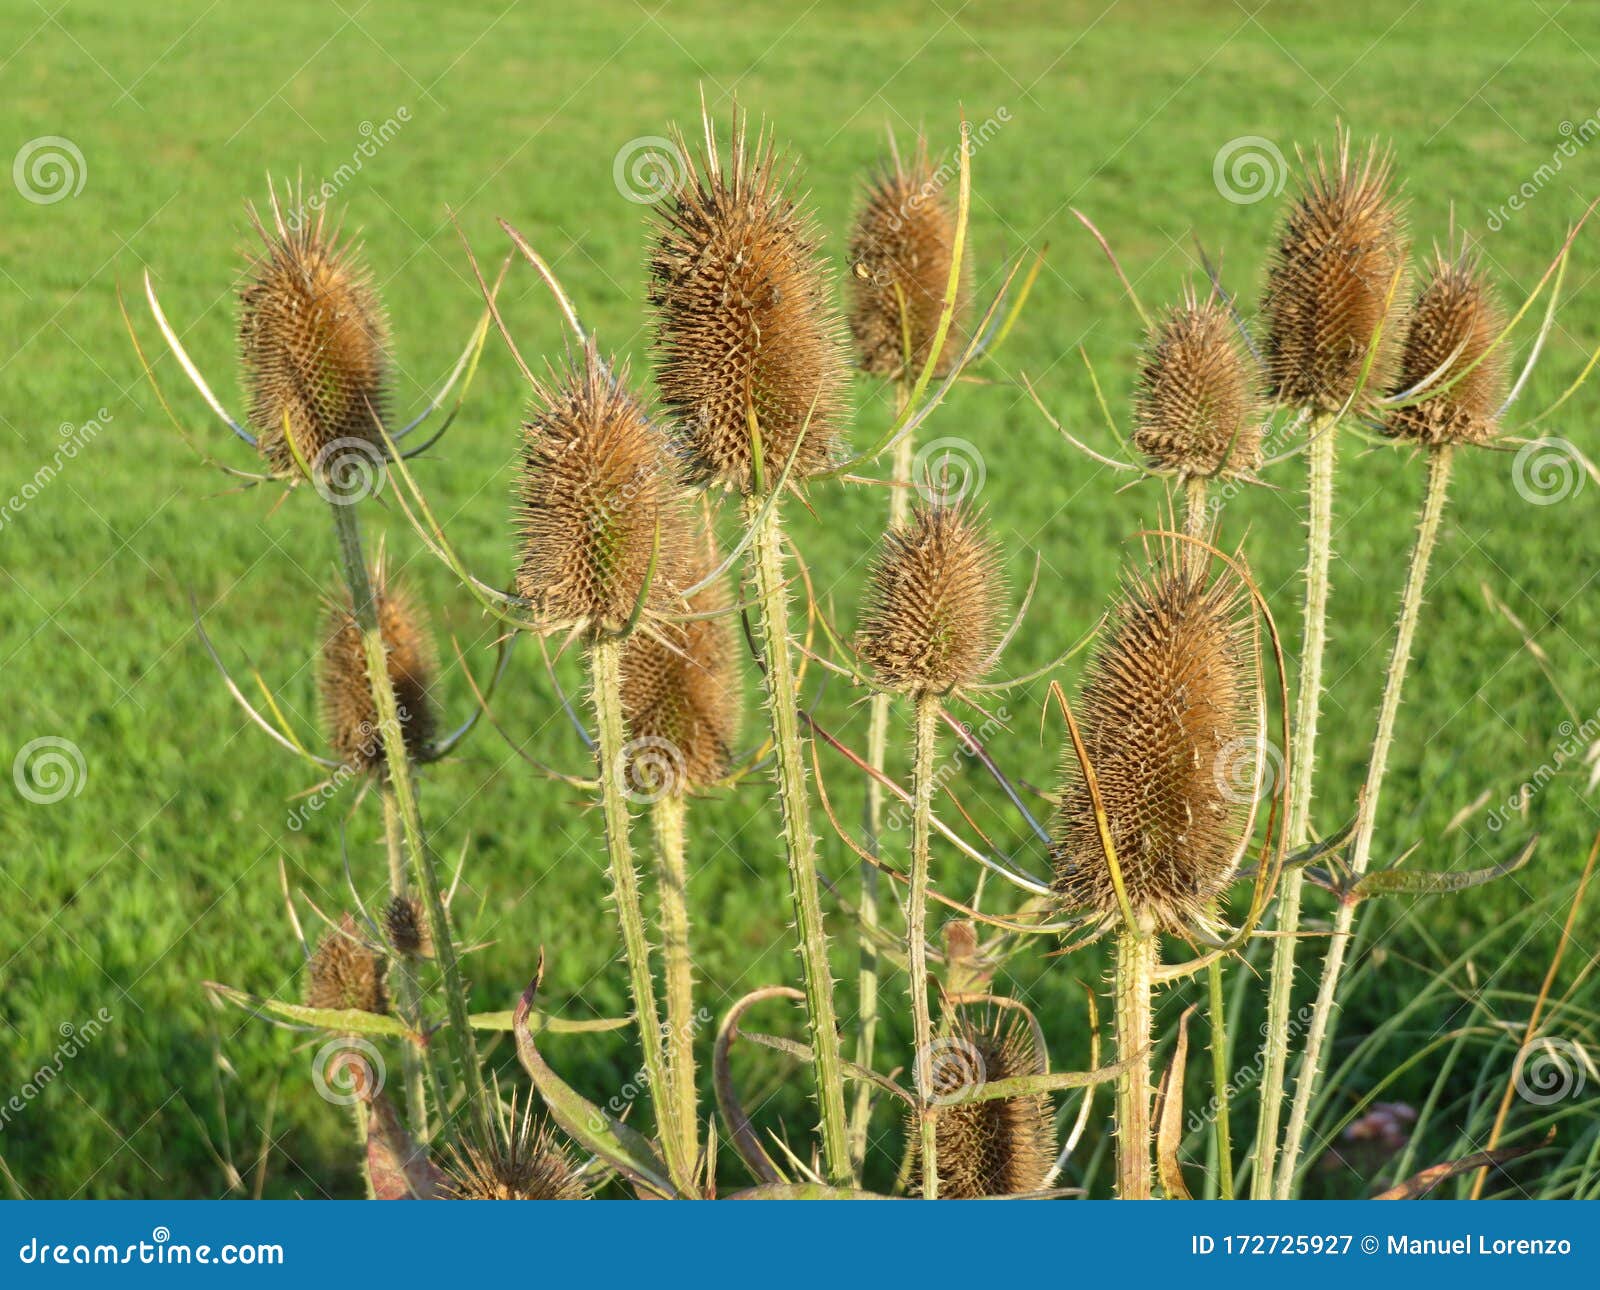 beautiful photo of thistles with dry skewers